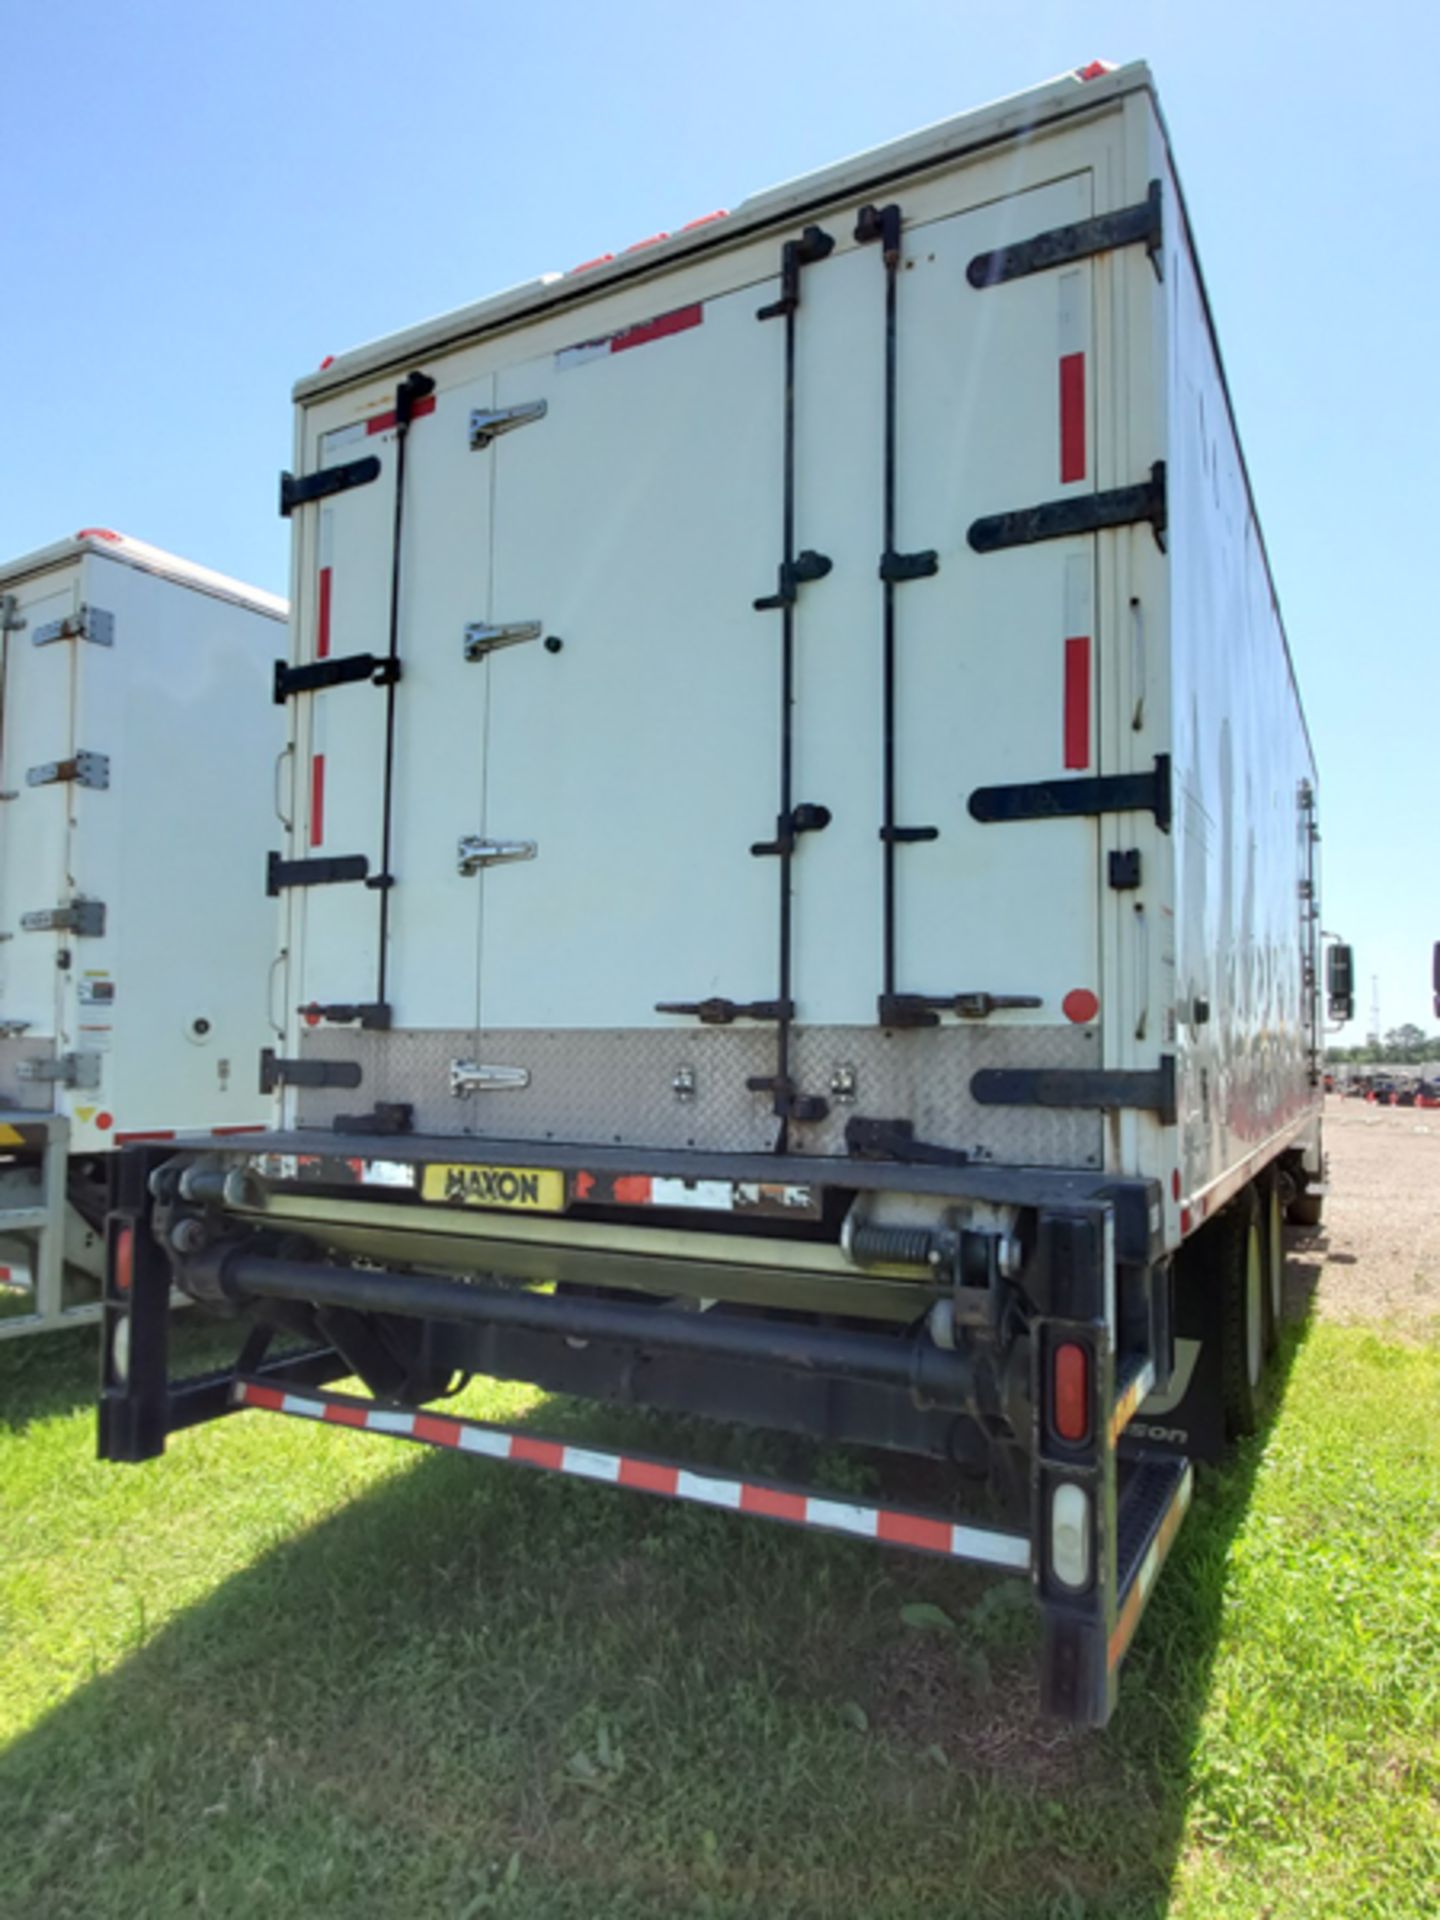 2018 INTERNATIONAL 4400 SBA 6X4 REFRIGERATED BOX TRUCK VIN#: 1HTMSTAR8JH529759, Approx Miles: 36313, - Image 3 of 9